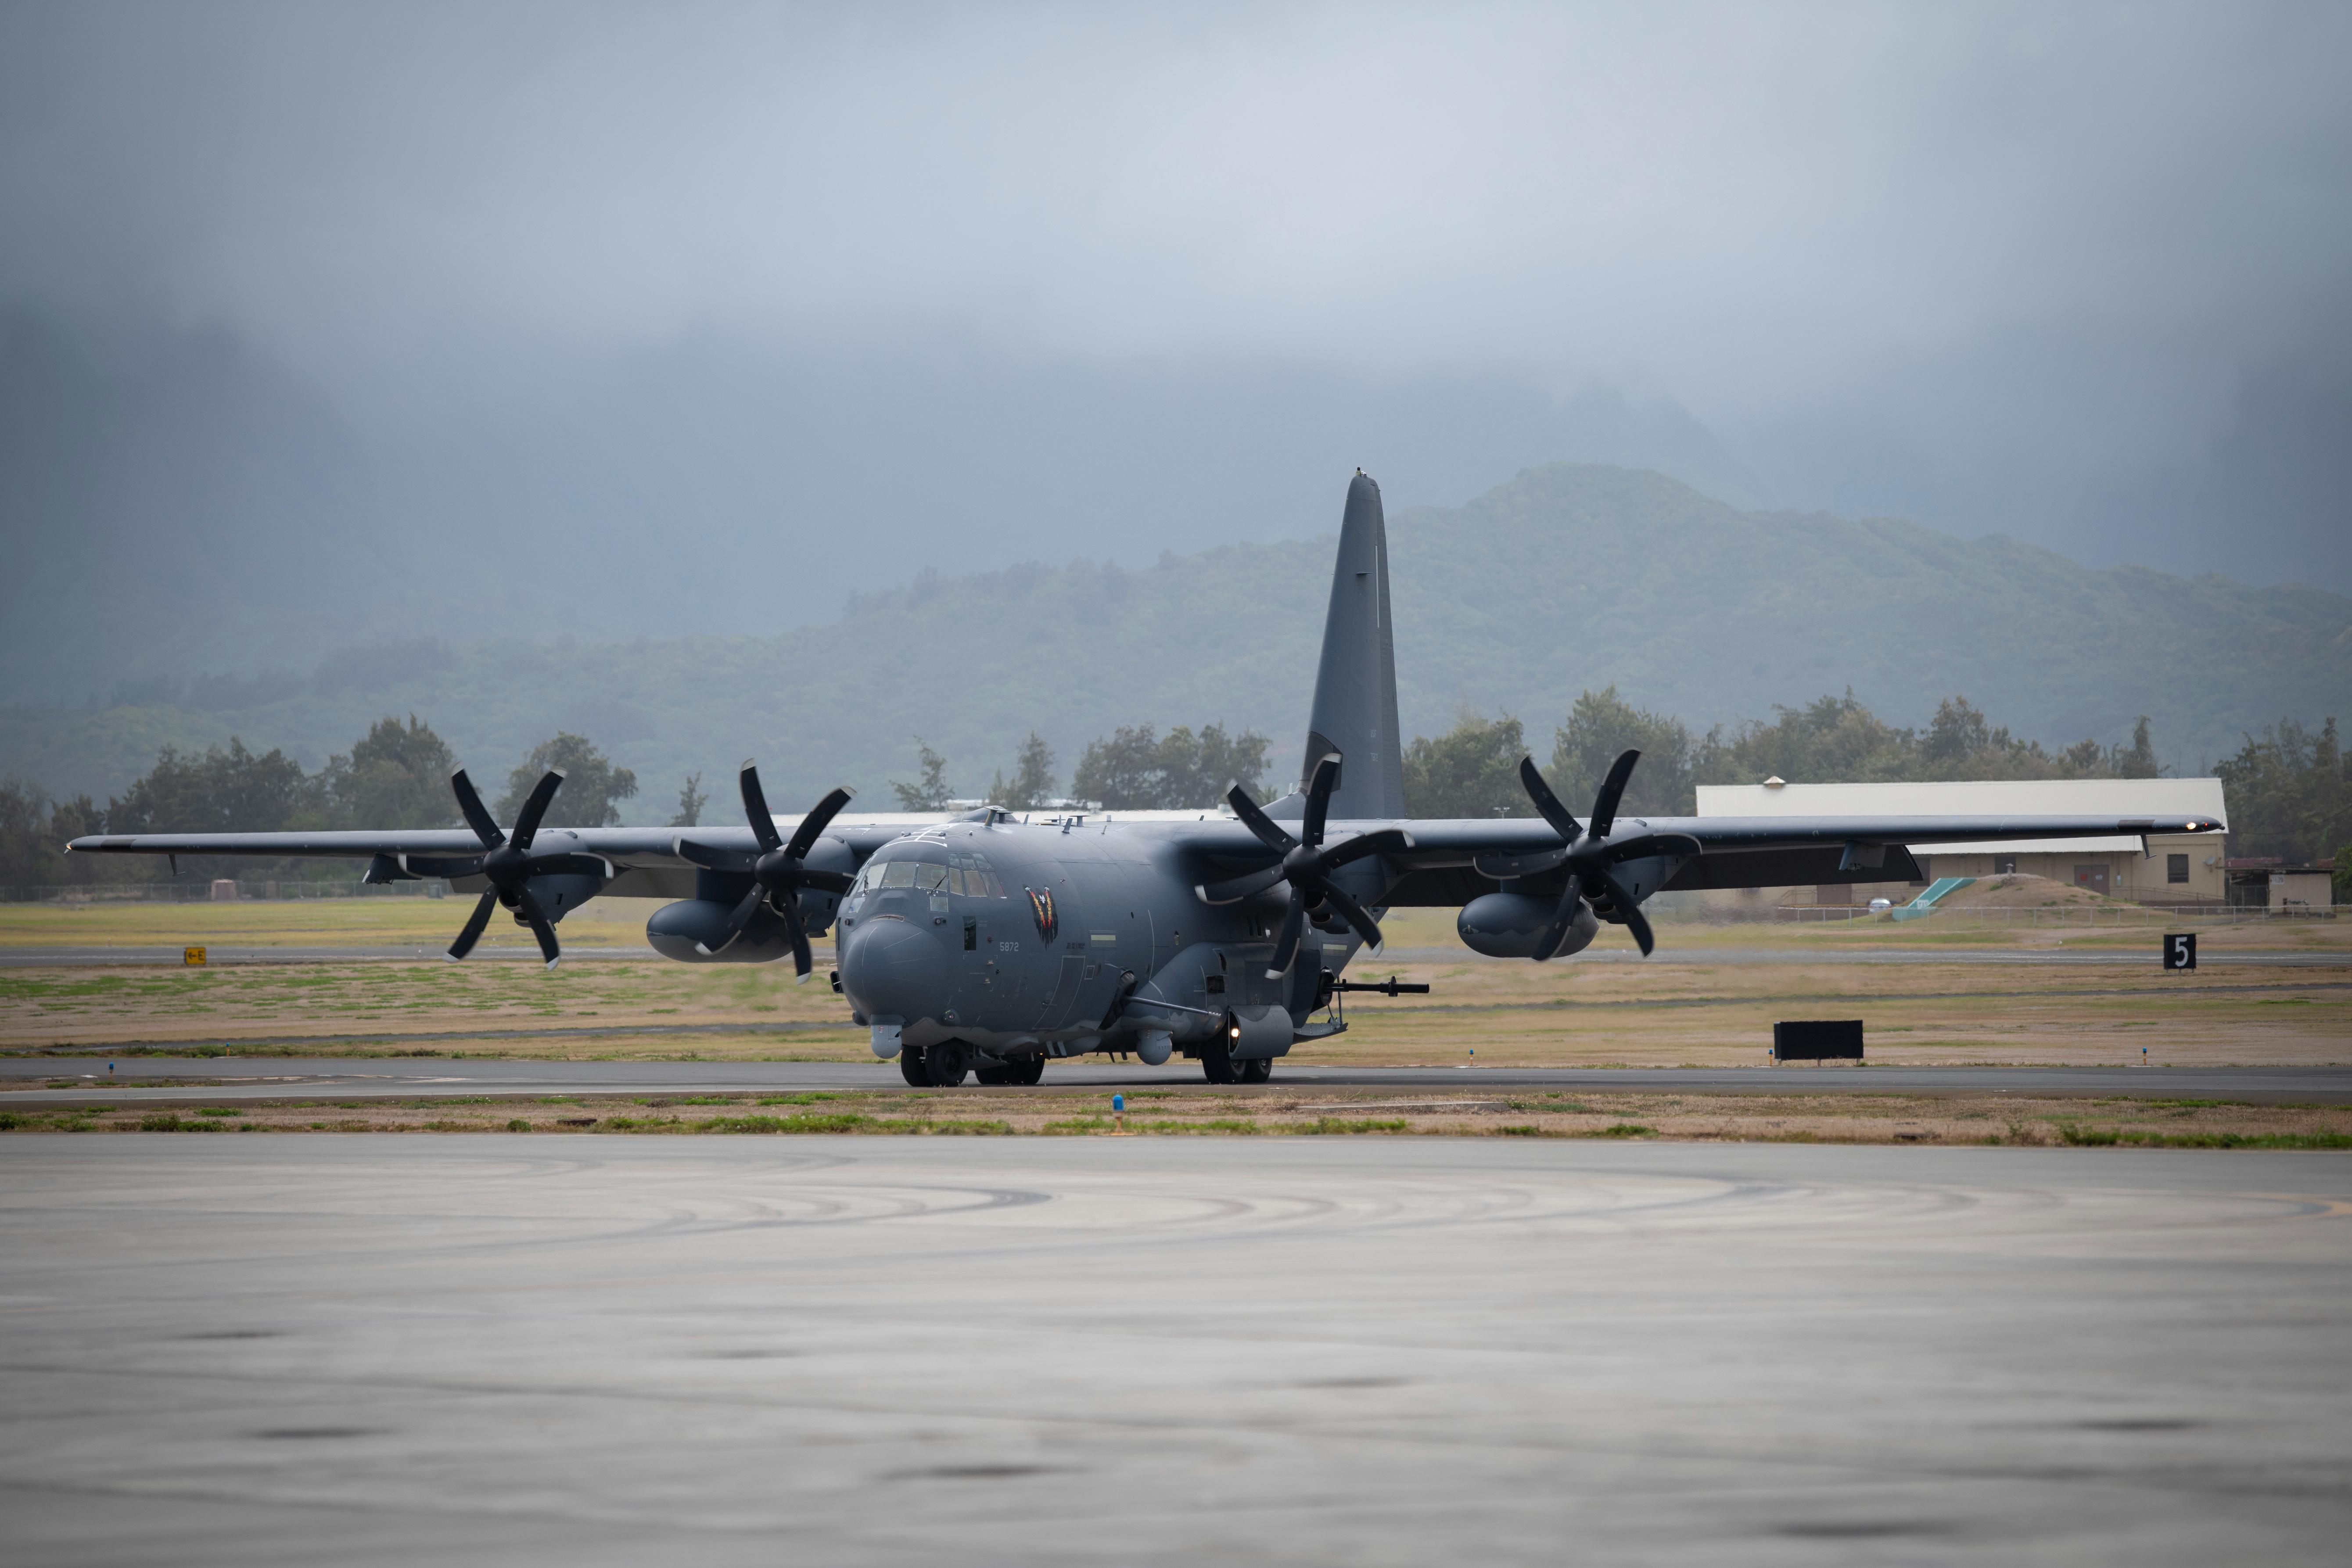 220716-F-KO270-1166 MARINE CORPS BASE HAWAII, Hawaii (July 16, 2022) An AC-130J Ghostrider gunship from the 4th Special Operations Squadron lands at Marine Corps Base Hawaii, to participate in Rim of the Pacific (RIMPAC) 2022. Twenty-six nations, 38 ships, four submarines,